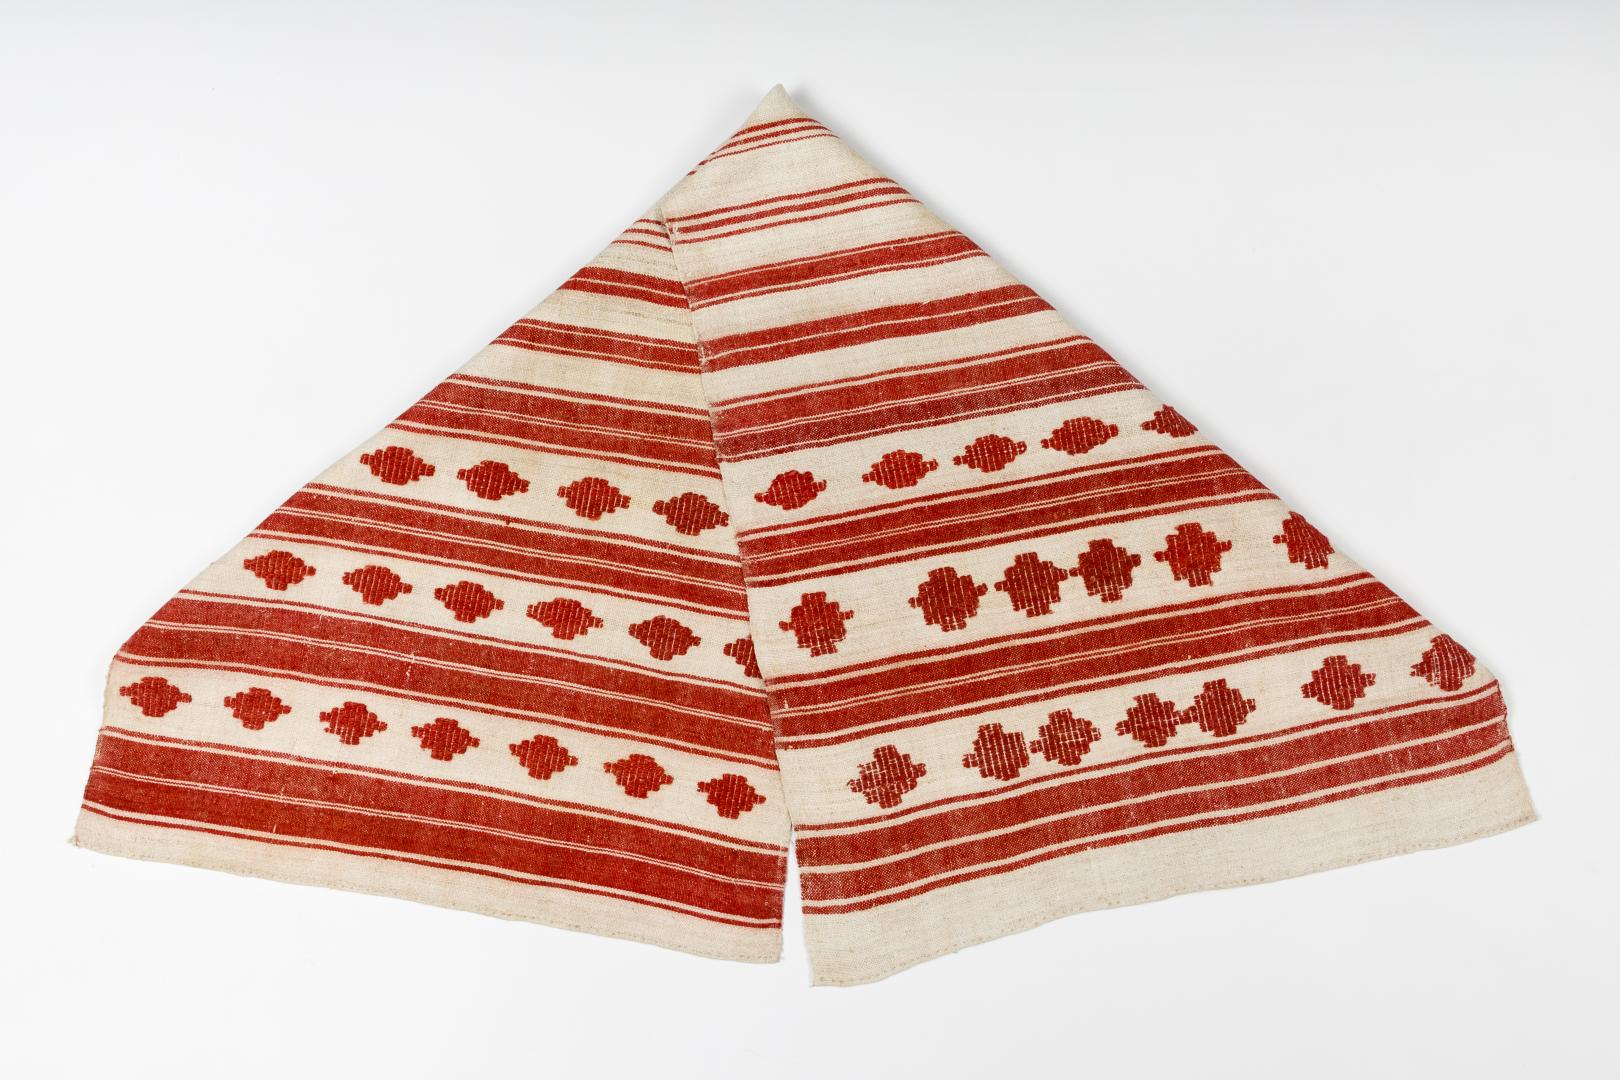 Woven rushnyk (towel) placed under a bread